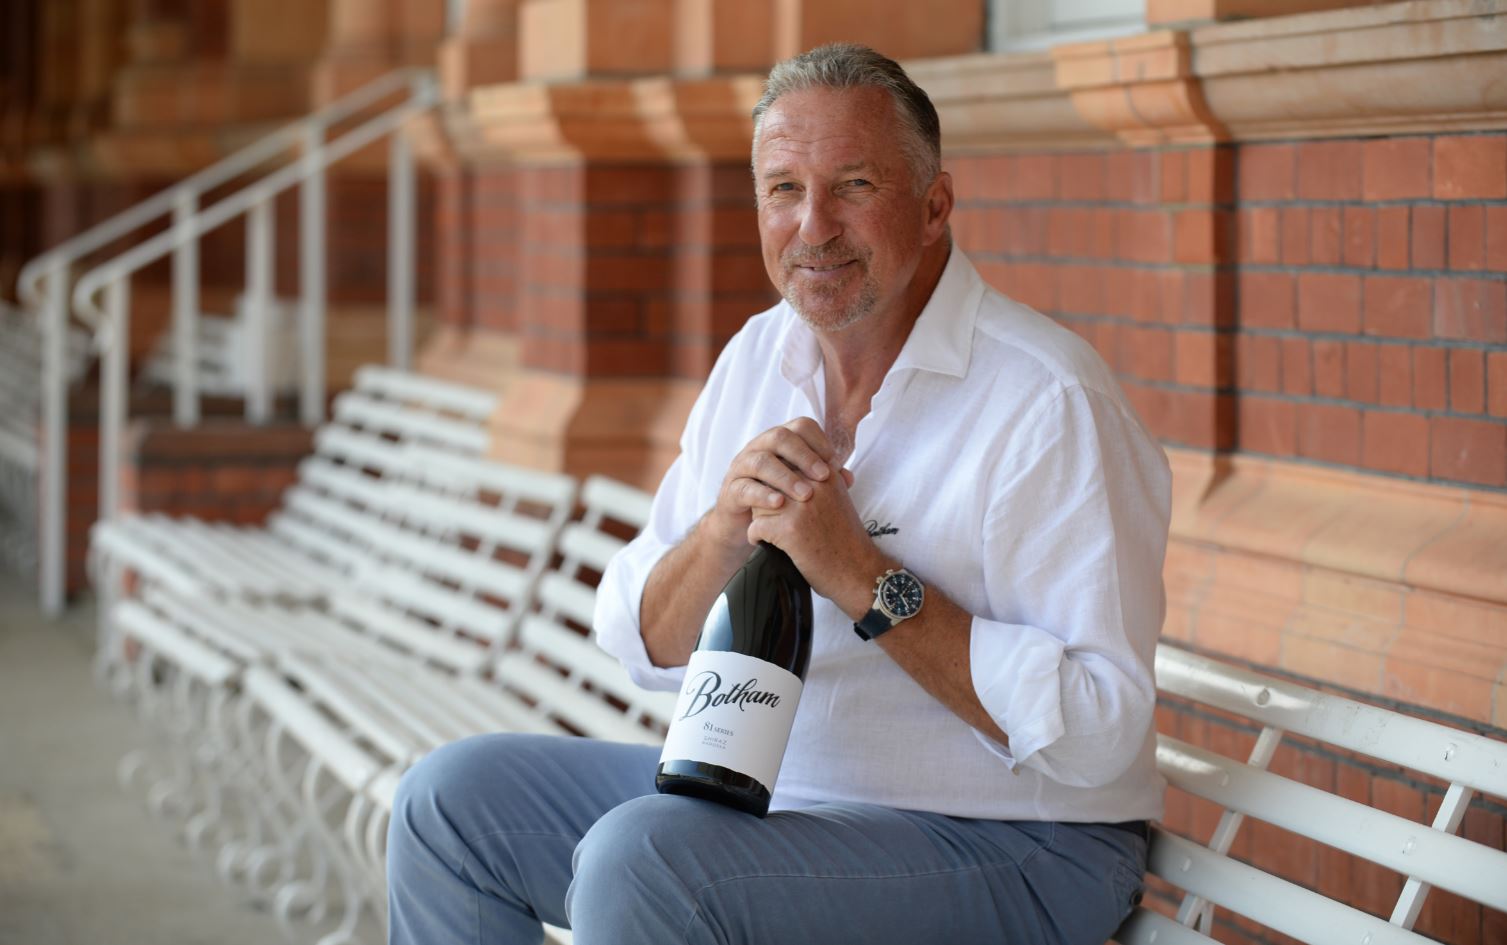 SIR IAN BOTHAM OBE EMBARKS ON EXCITING NEW VENTURE WITH PREMIUM WINE